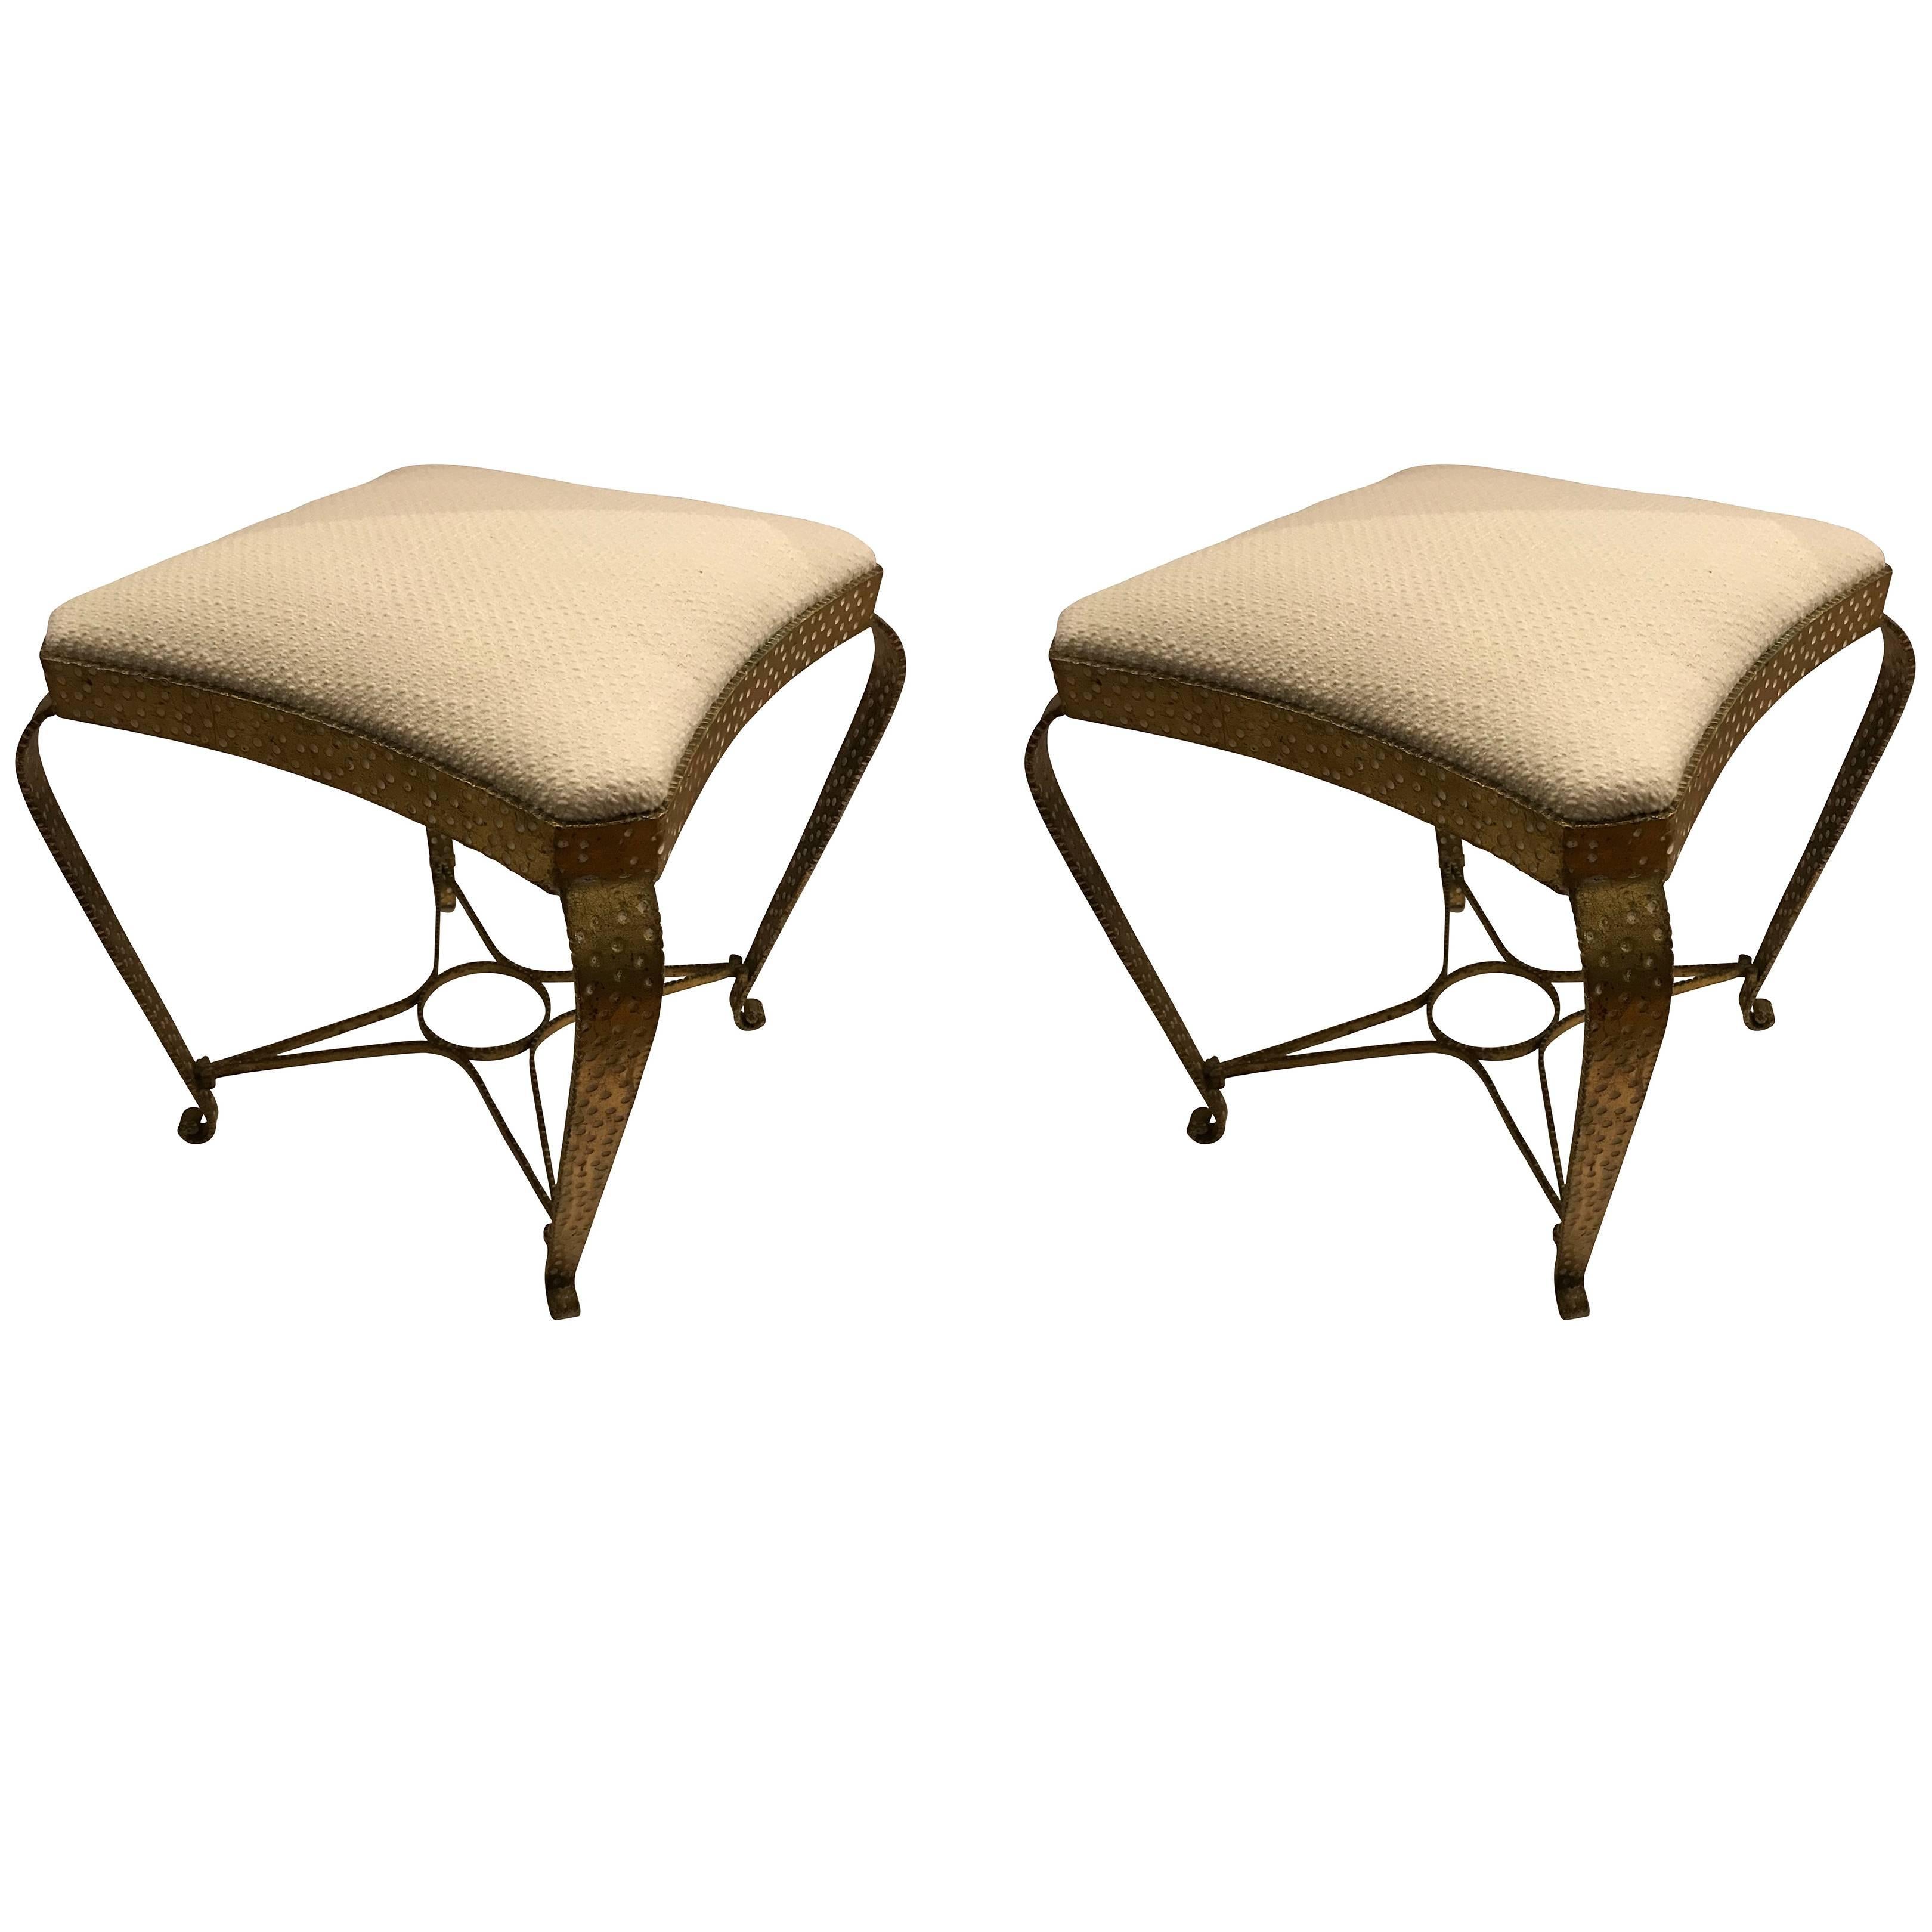 Pair of Hammered Gold Gilt Metal Foot Stools, Italian, 1950s